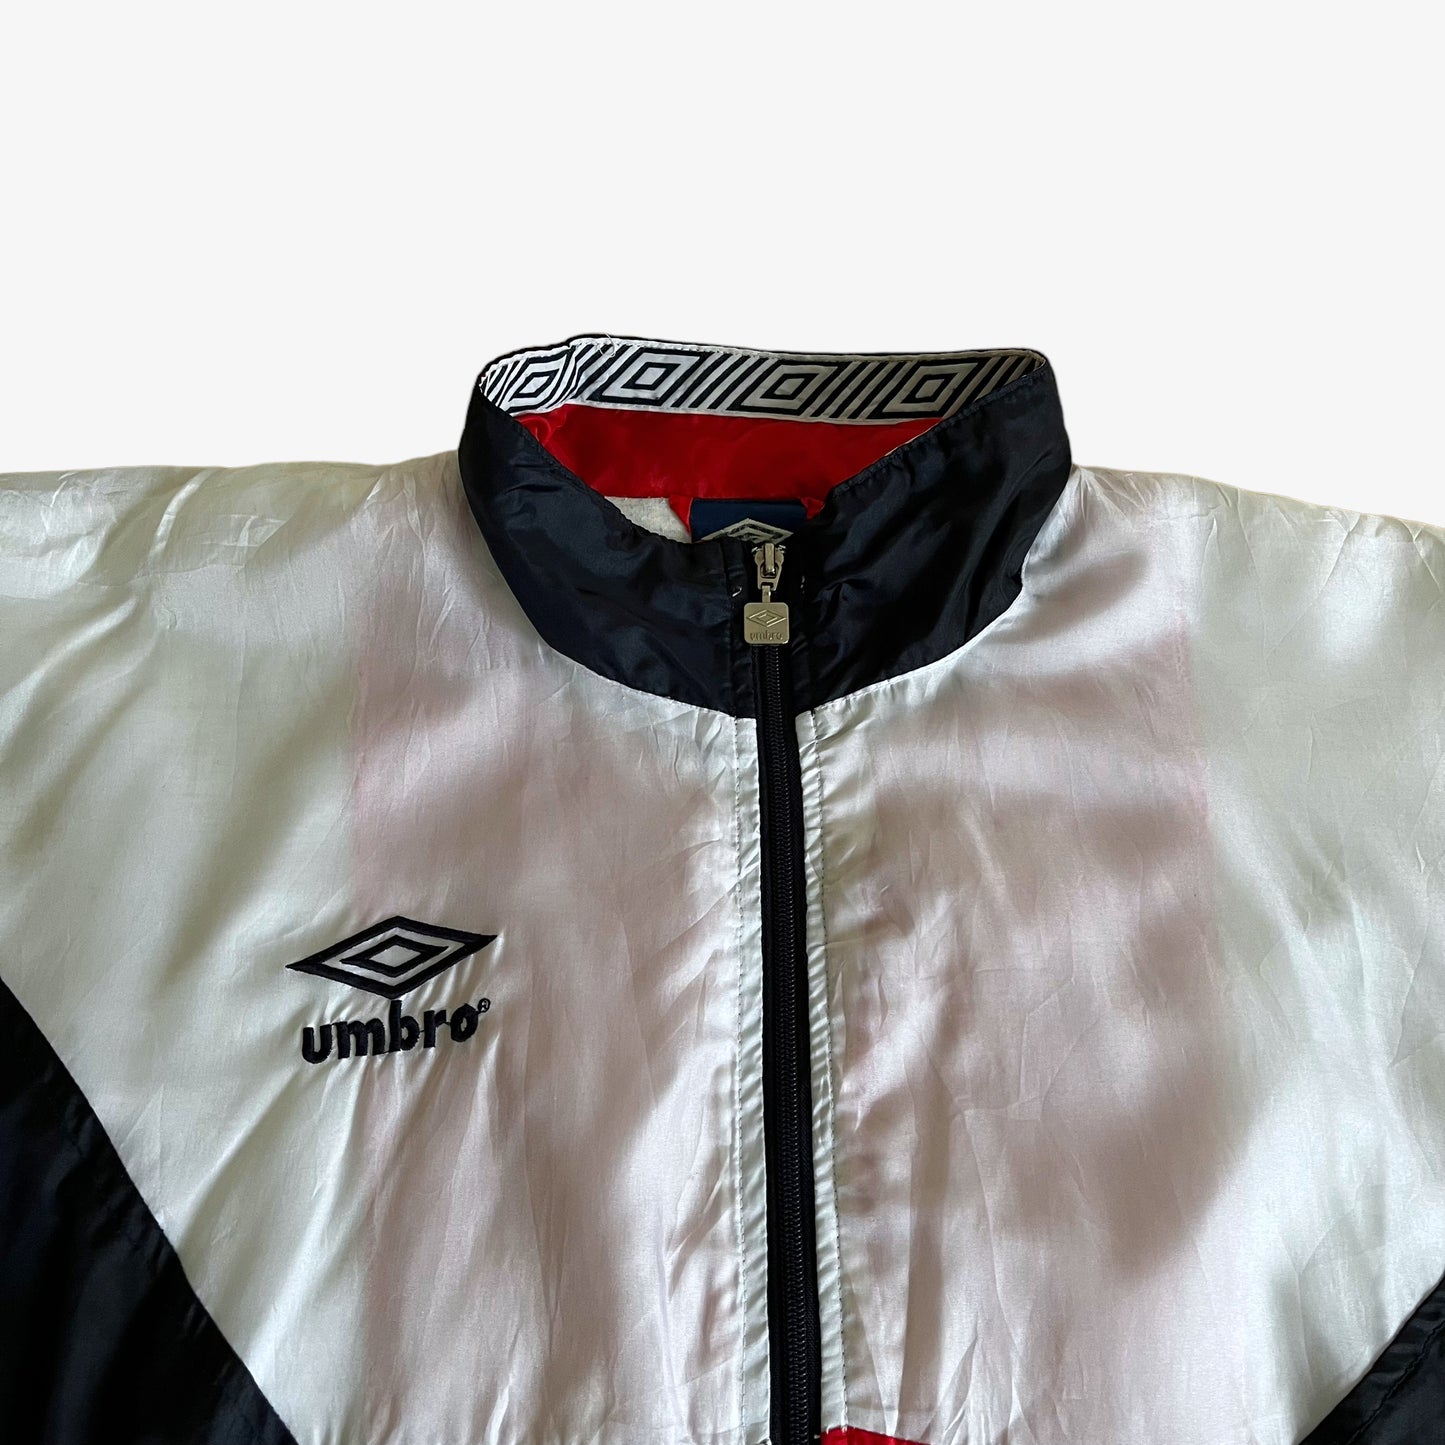 Vintage 90s Umbro England Colourway Track Jacket With Back Spell Out Zip - Casspios Dream